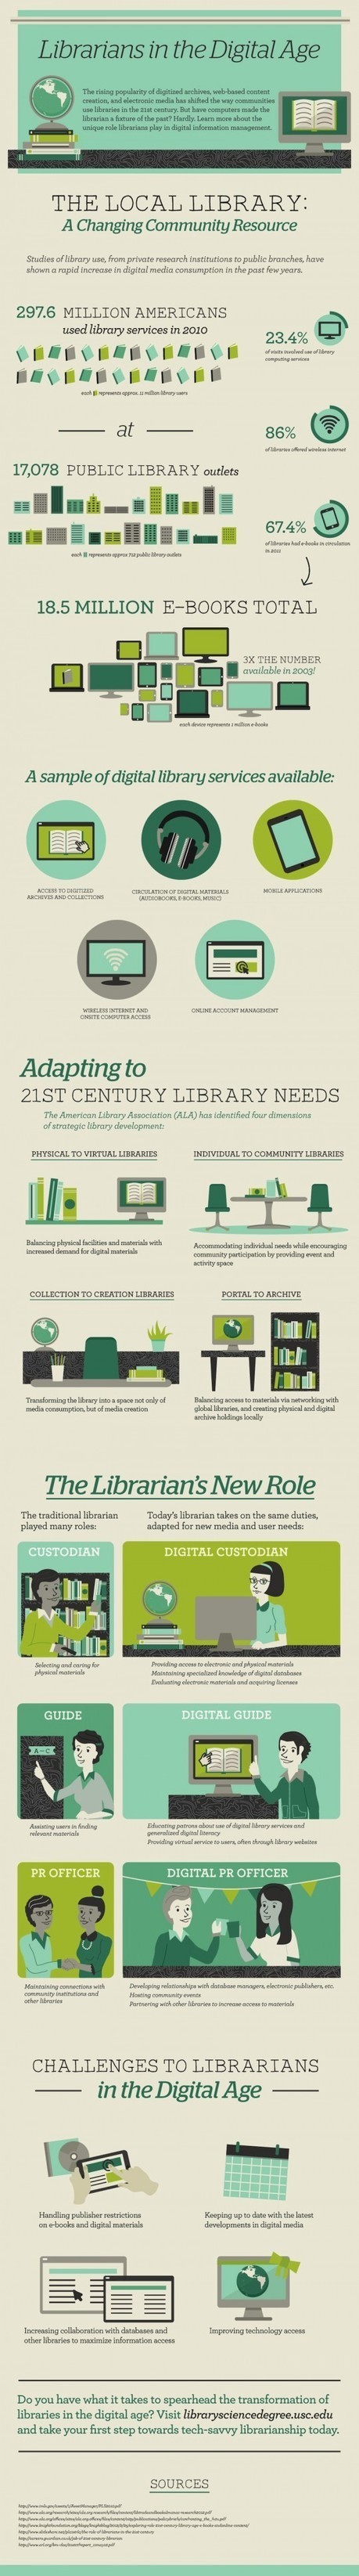 In digital age, librarians are needed more than ever [infographic] | Information and digital literacy in education via the digital path | Scoop.it